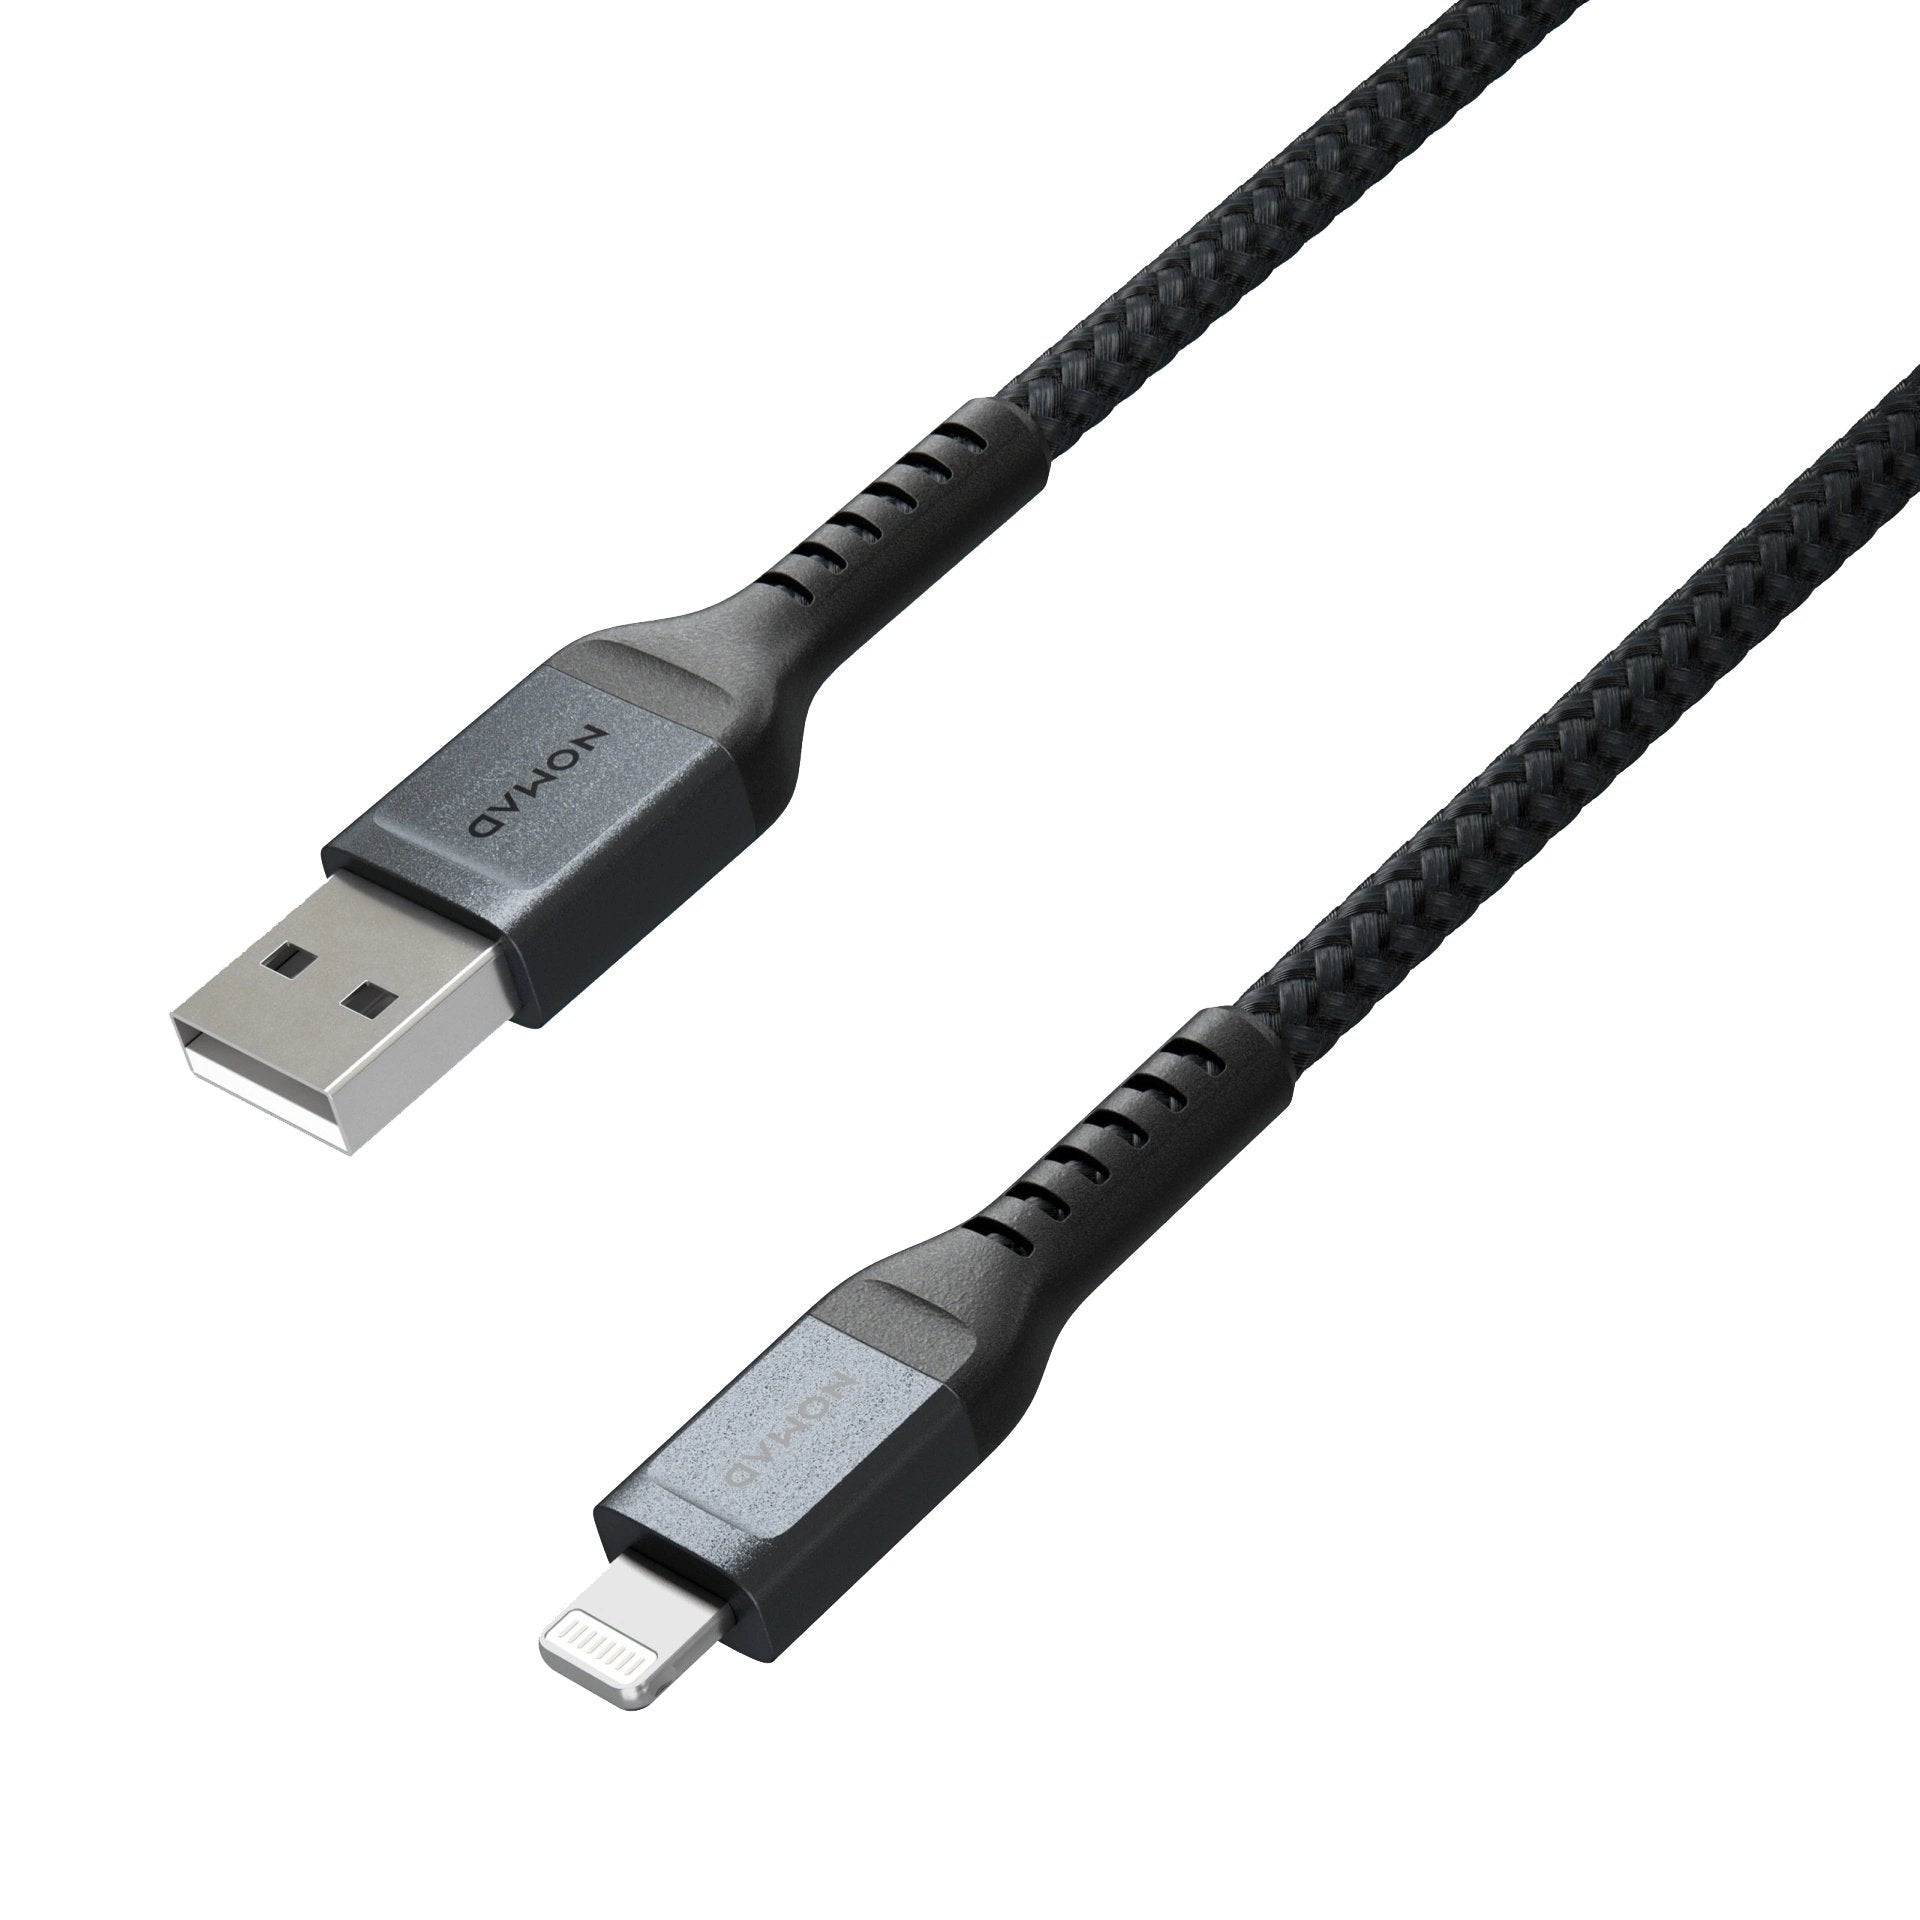 NOMAD Rugged USB-A to Lightning Cables 1.5M, Black Cable NOMAD 